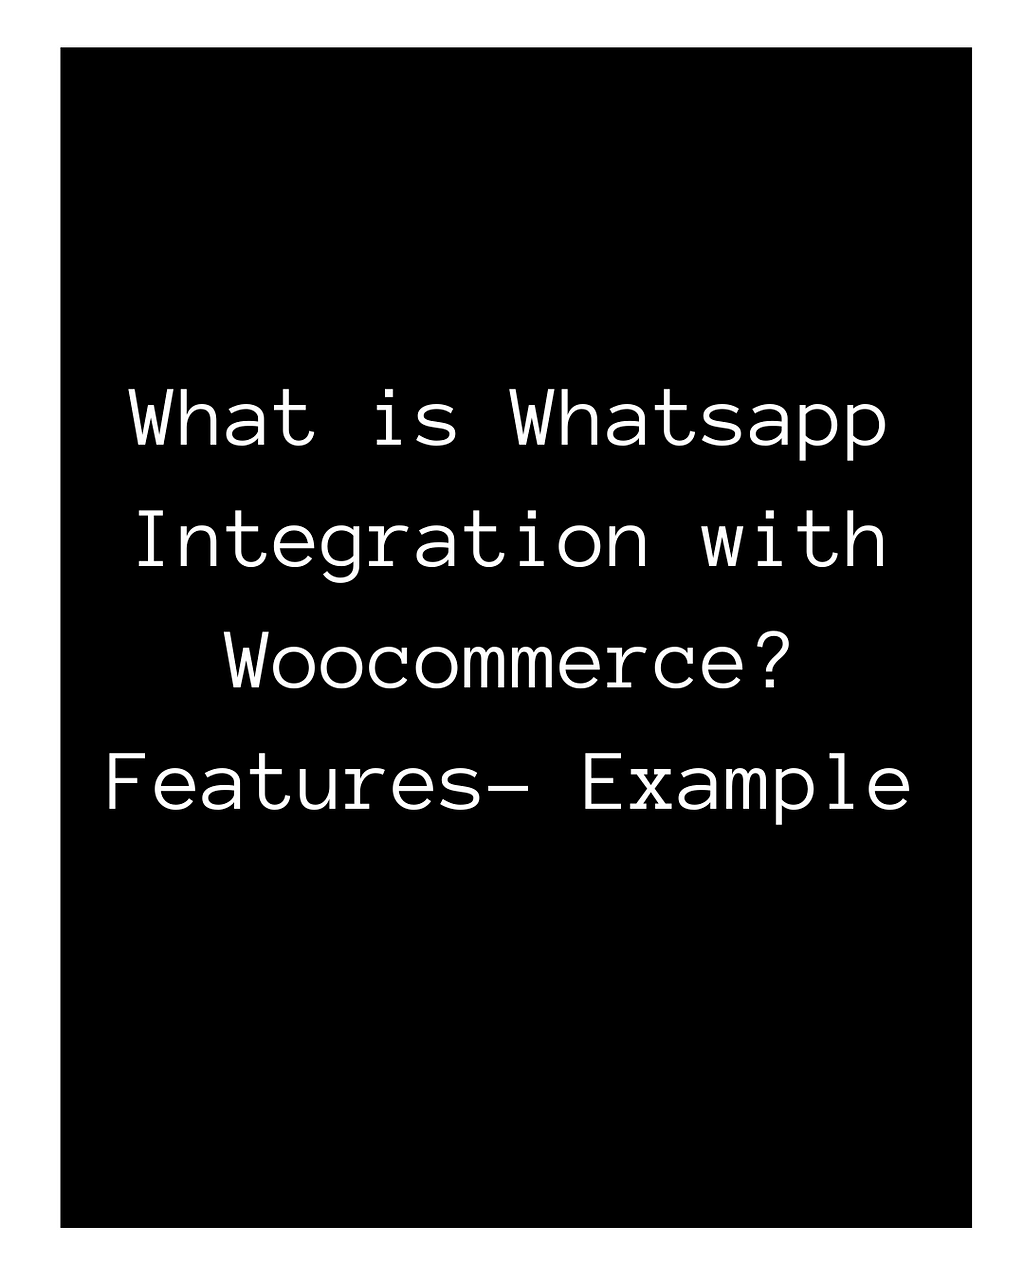 WC MESSAGING-WHATSAPP FOR WOOCOMMERCE